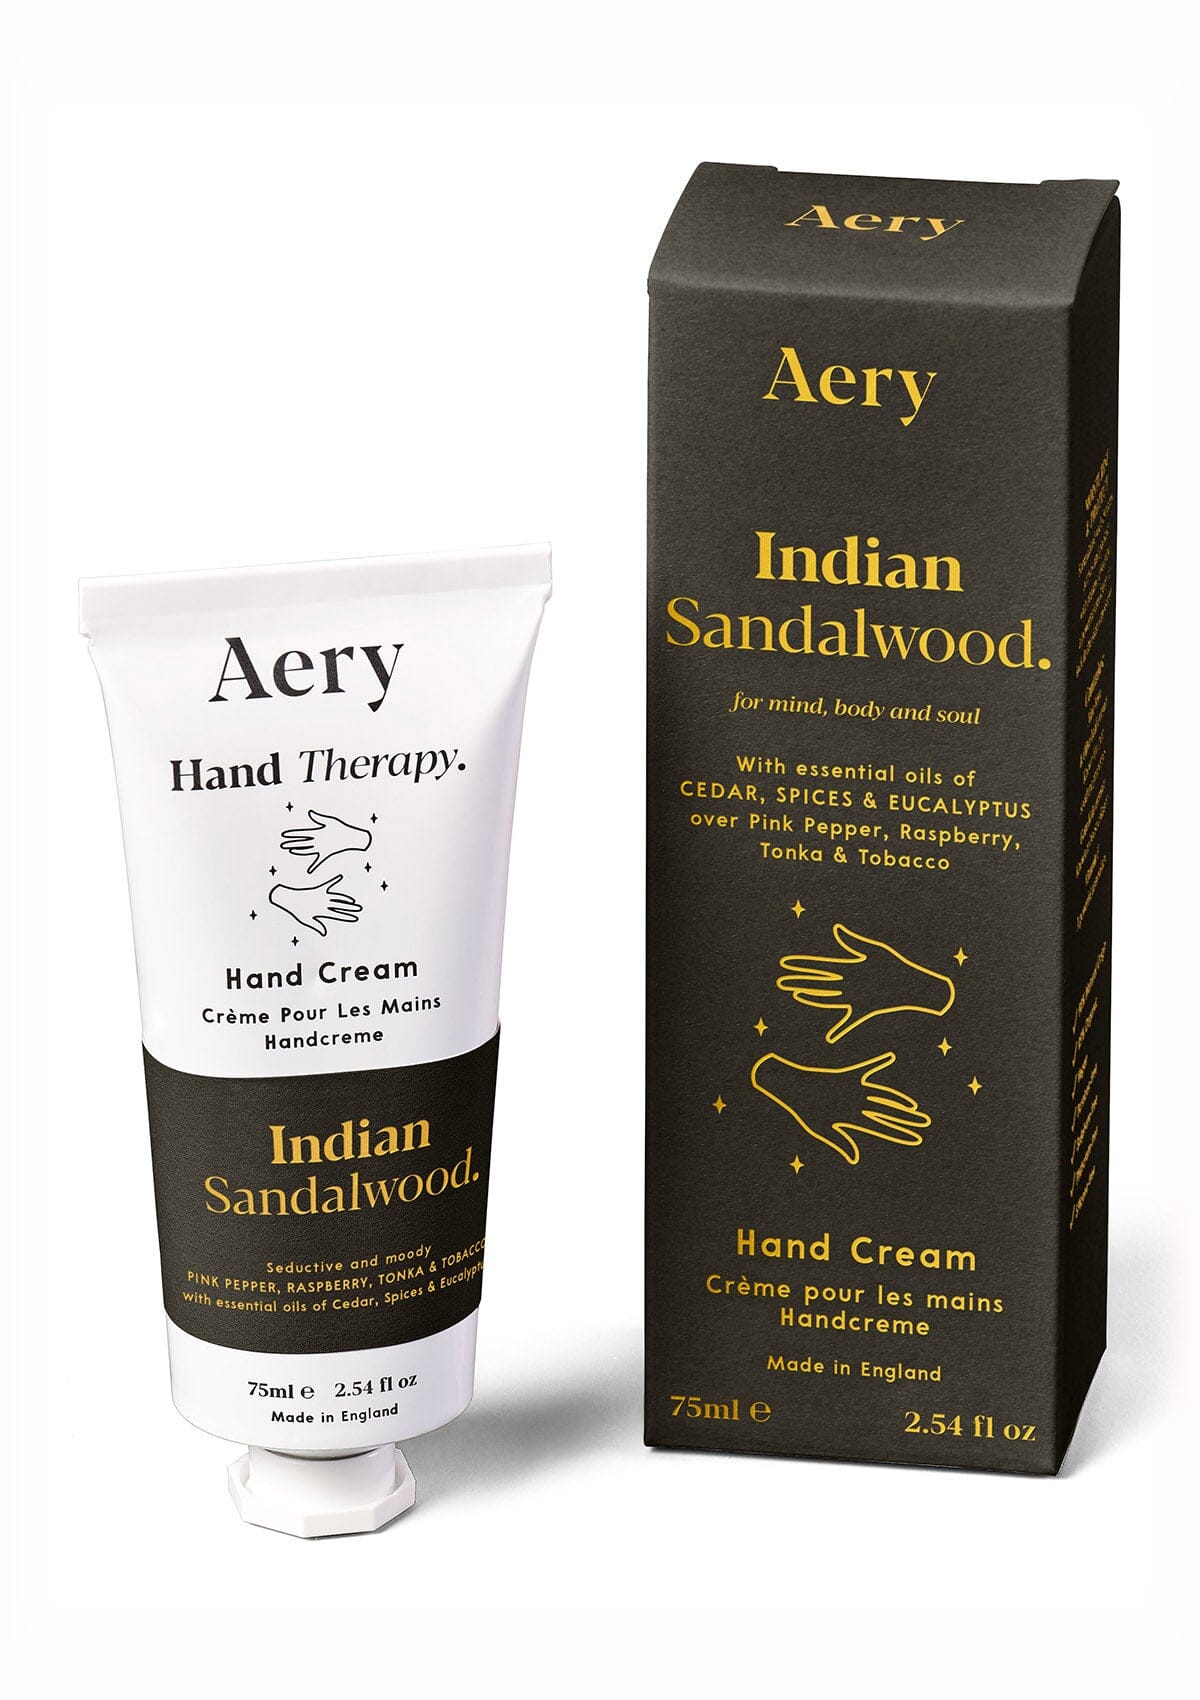 Black Indian Sandalwood hand cream displayed next to product packaging by Aery displayed on white background 